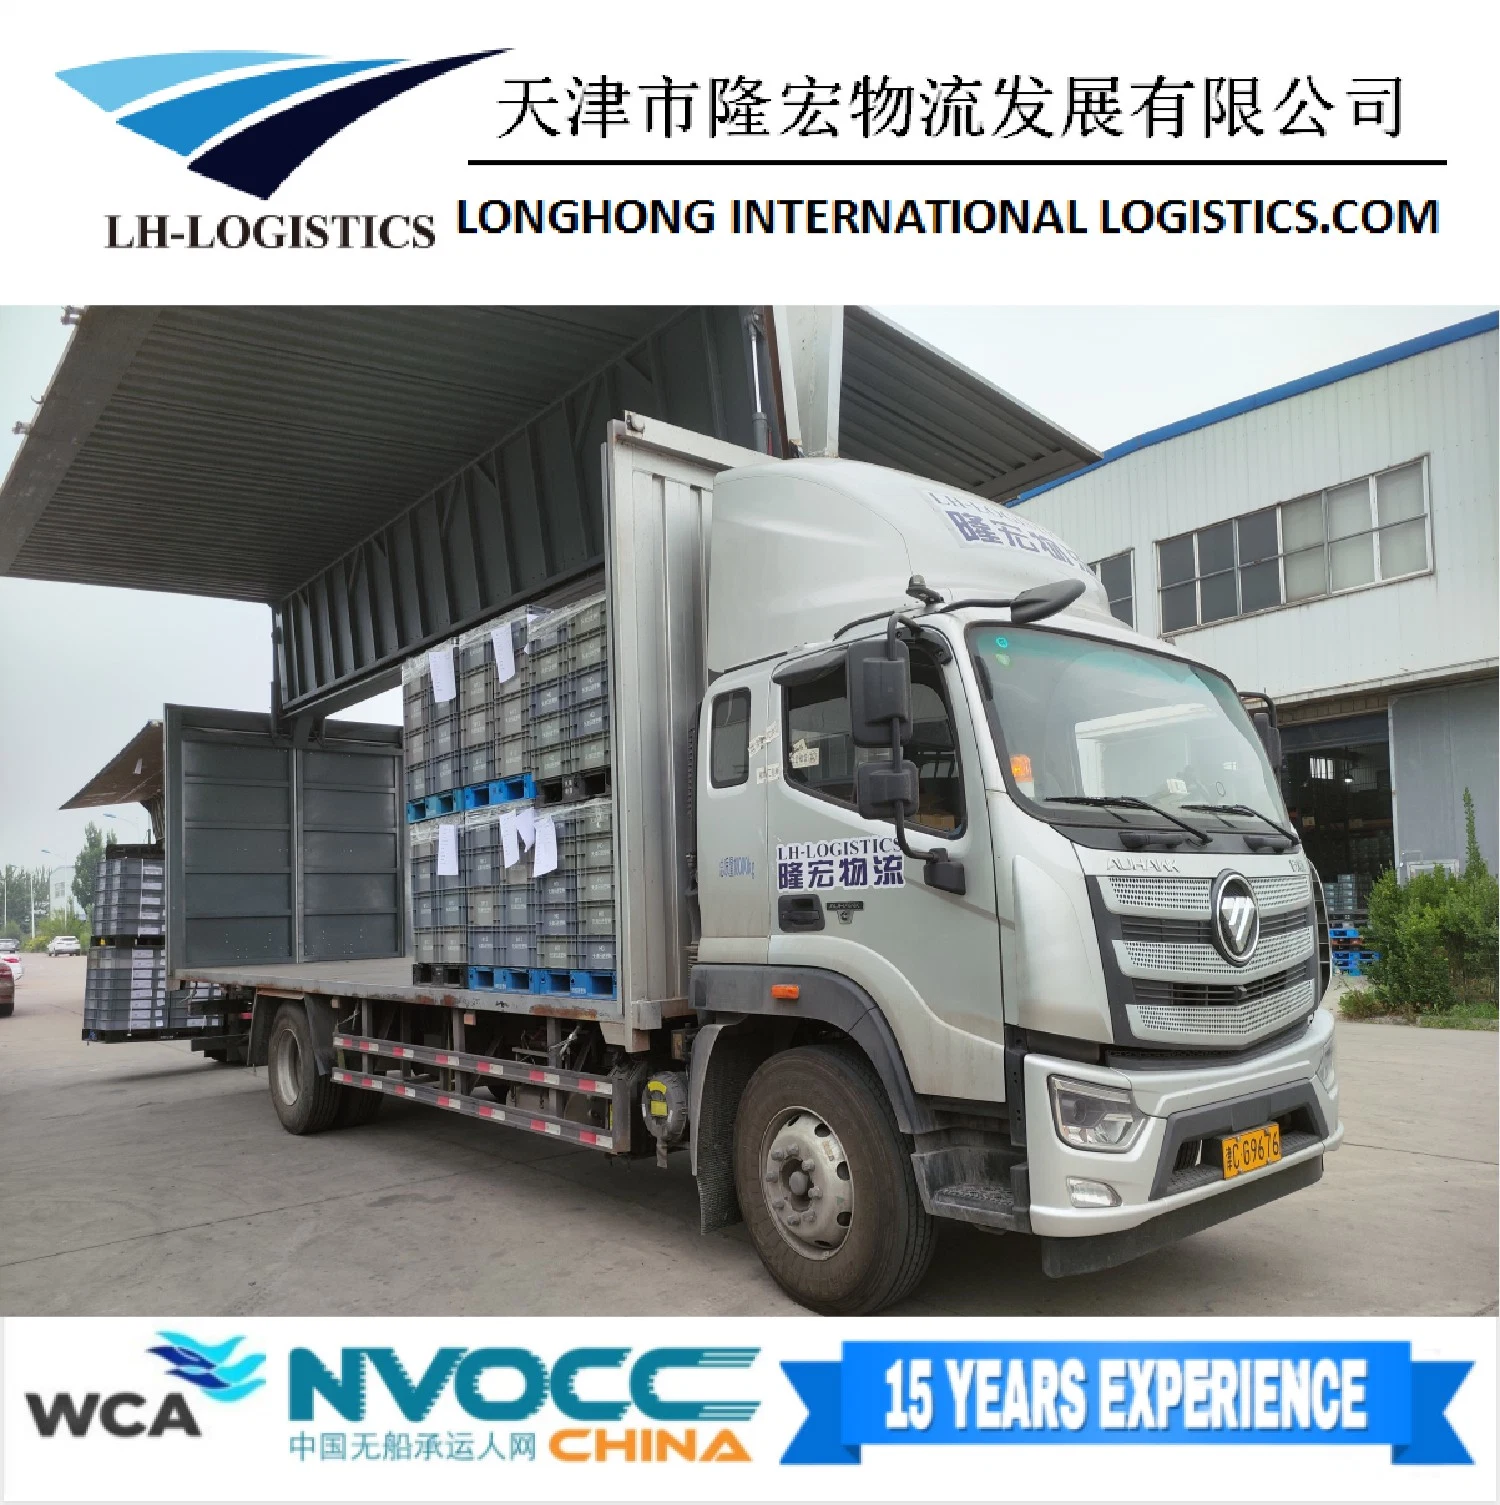 Professional Import Customs Clearance Storage Bonded Warehouse Service/Warehouse Service in China 1688